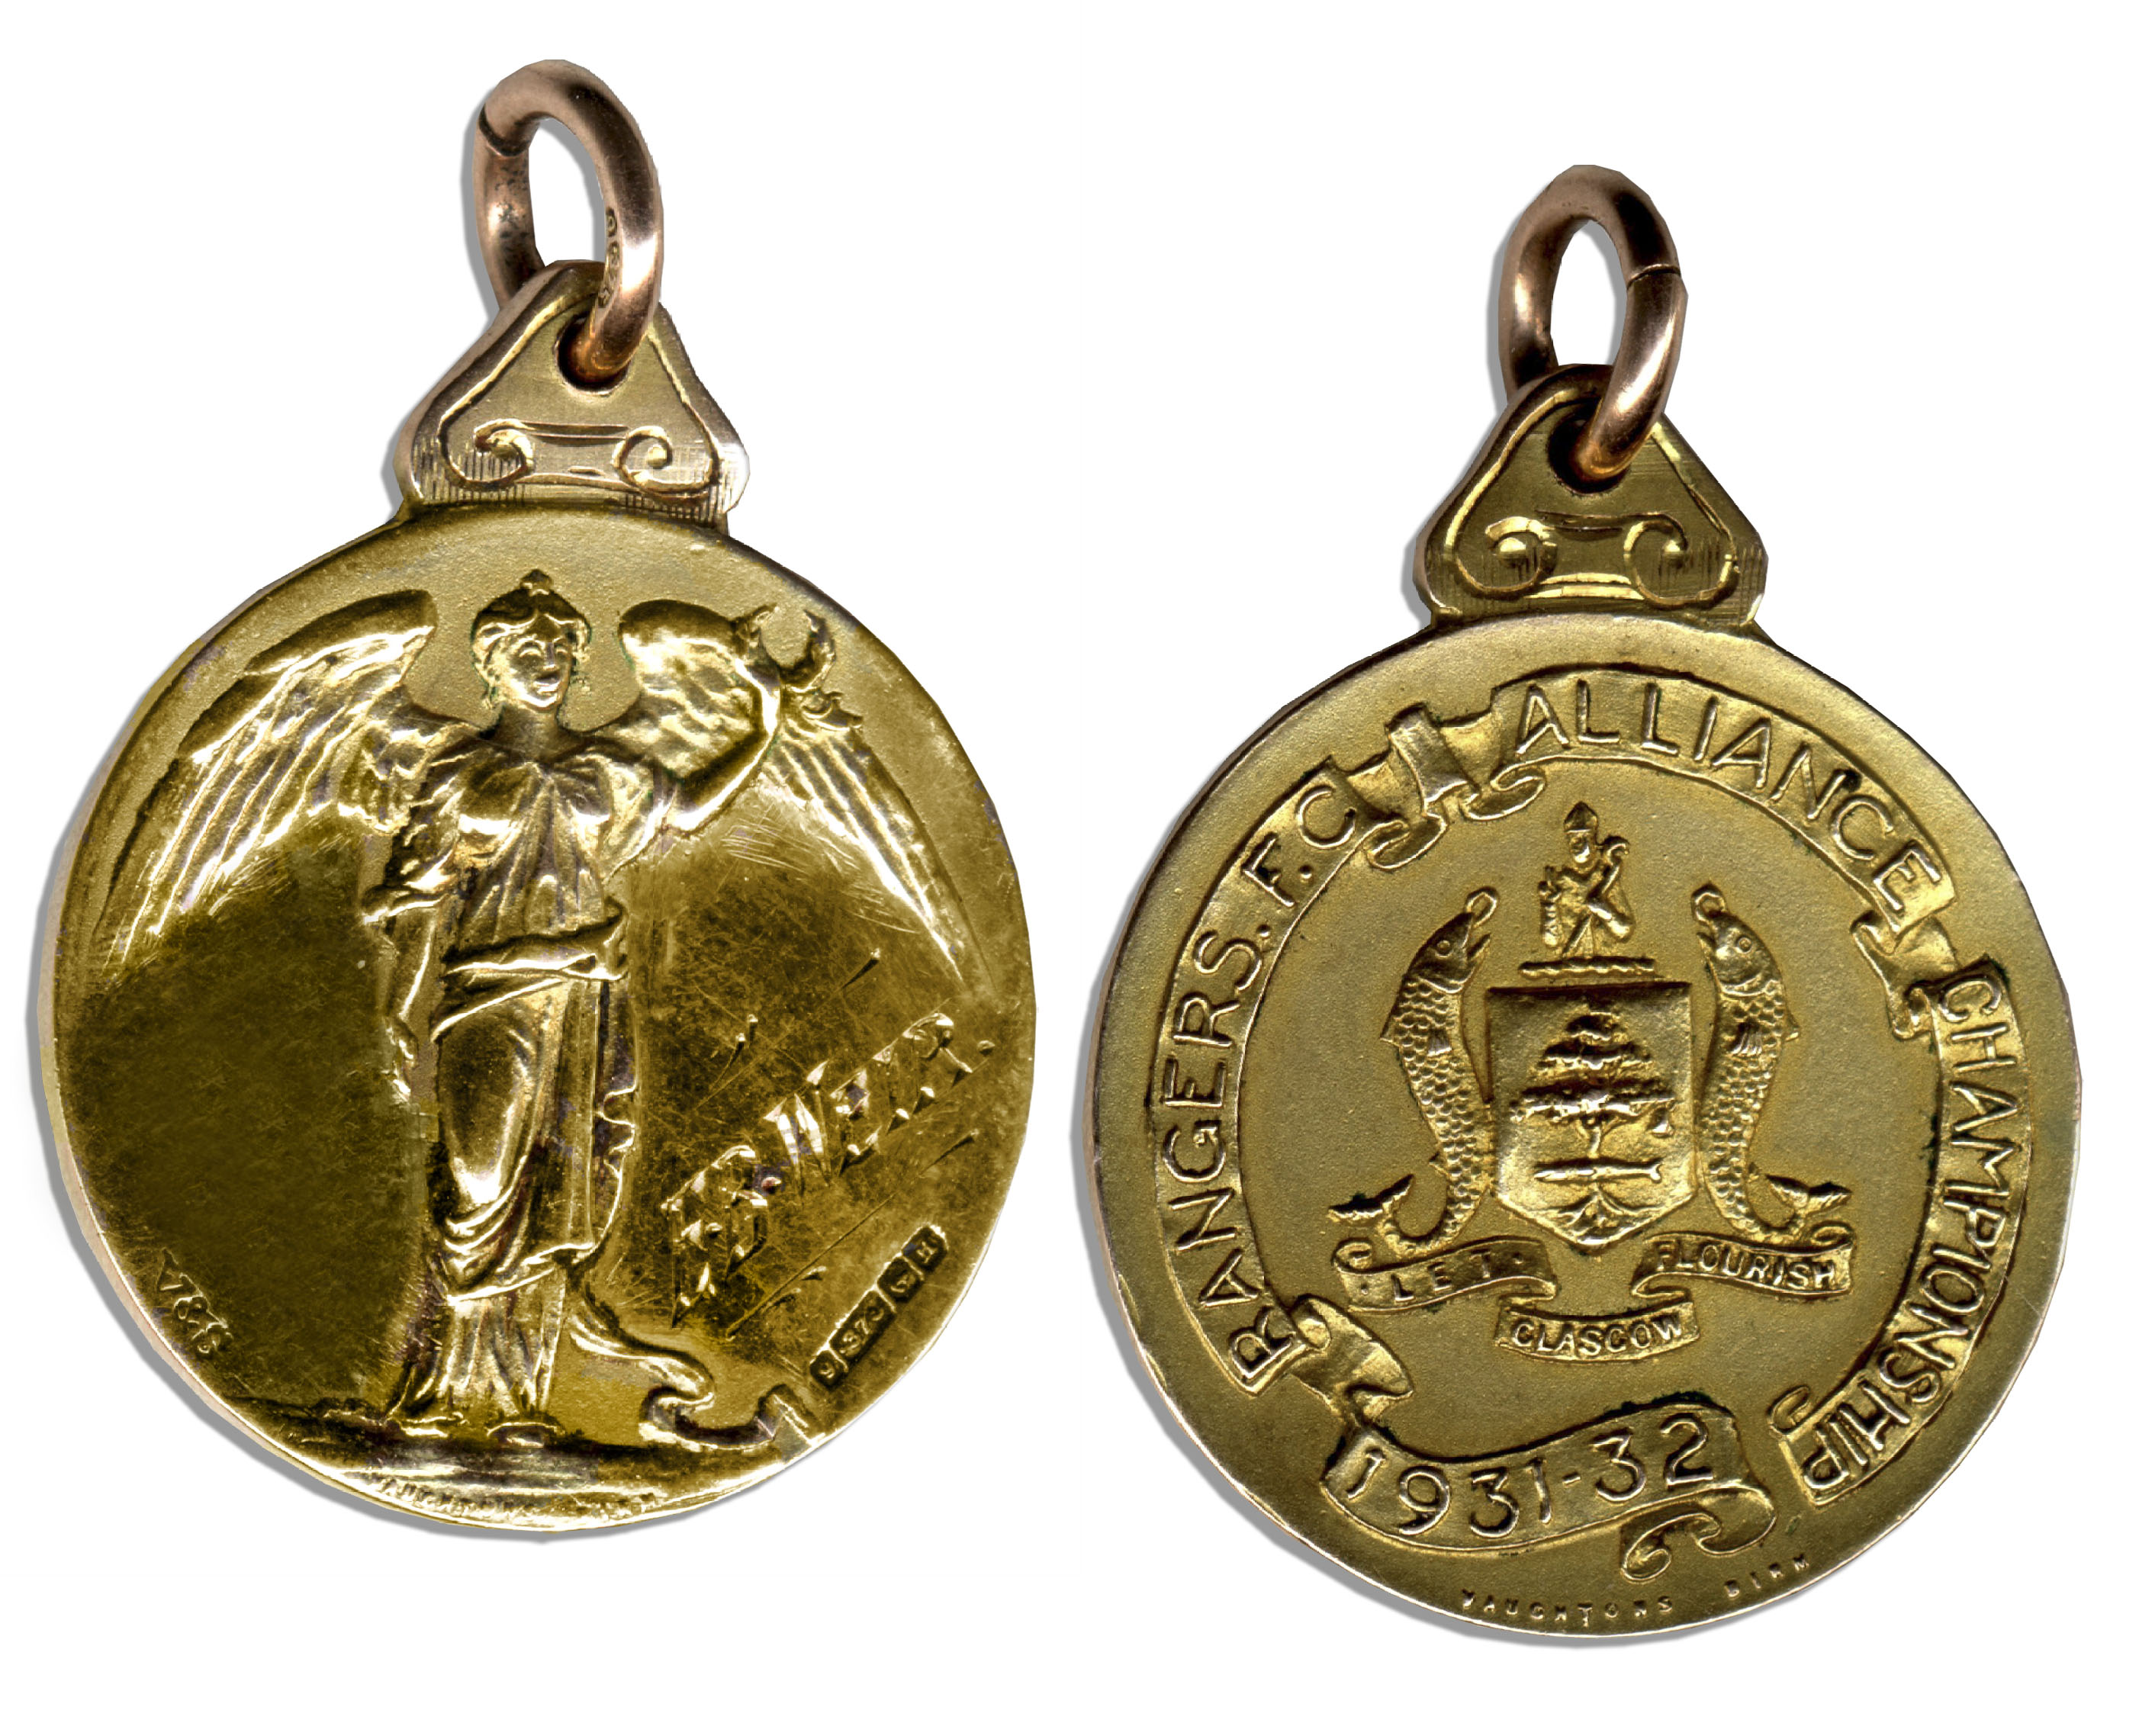 Scottish Football Alliance winner's gold medal for the Reserve League's Rangers, from the 1931-